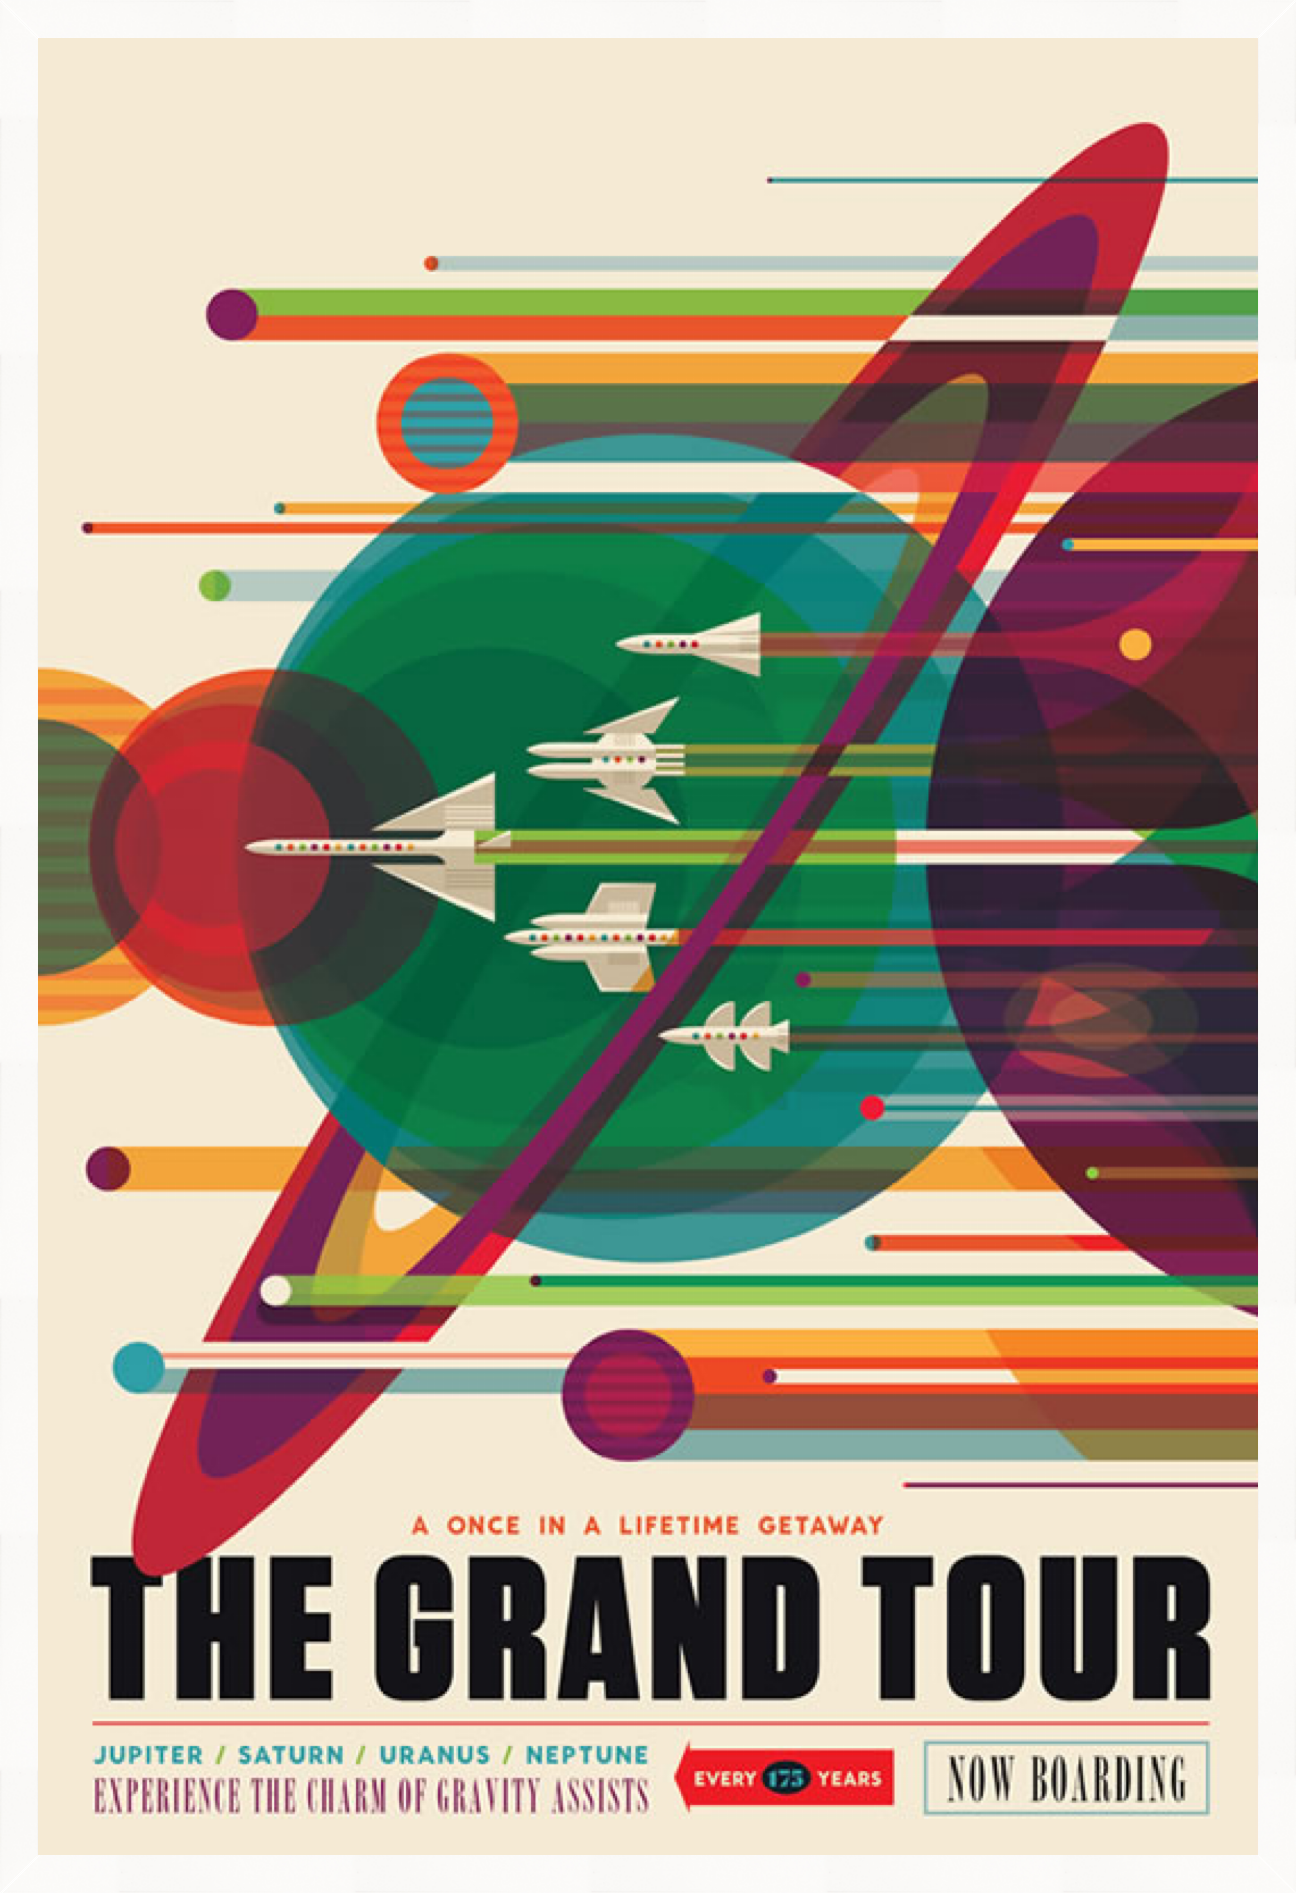 The Grand Tour – NASA /JPL Visions of the Future Poster